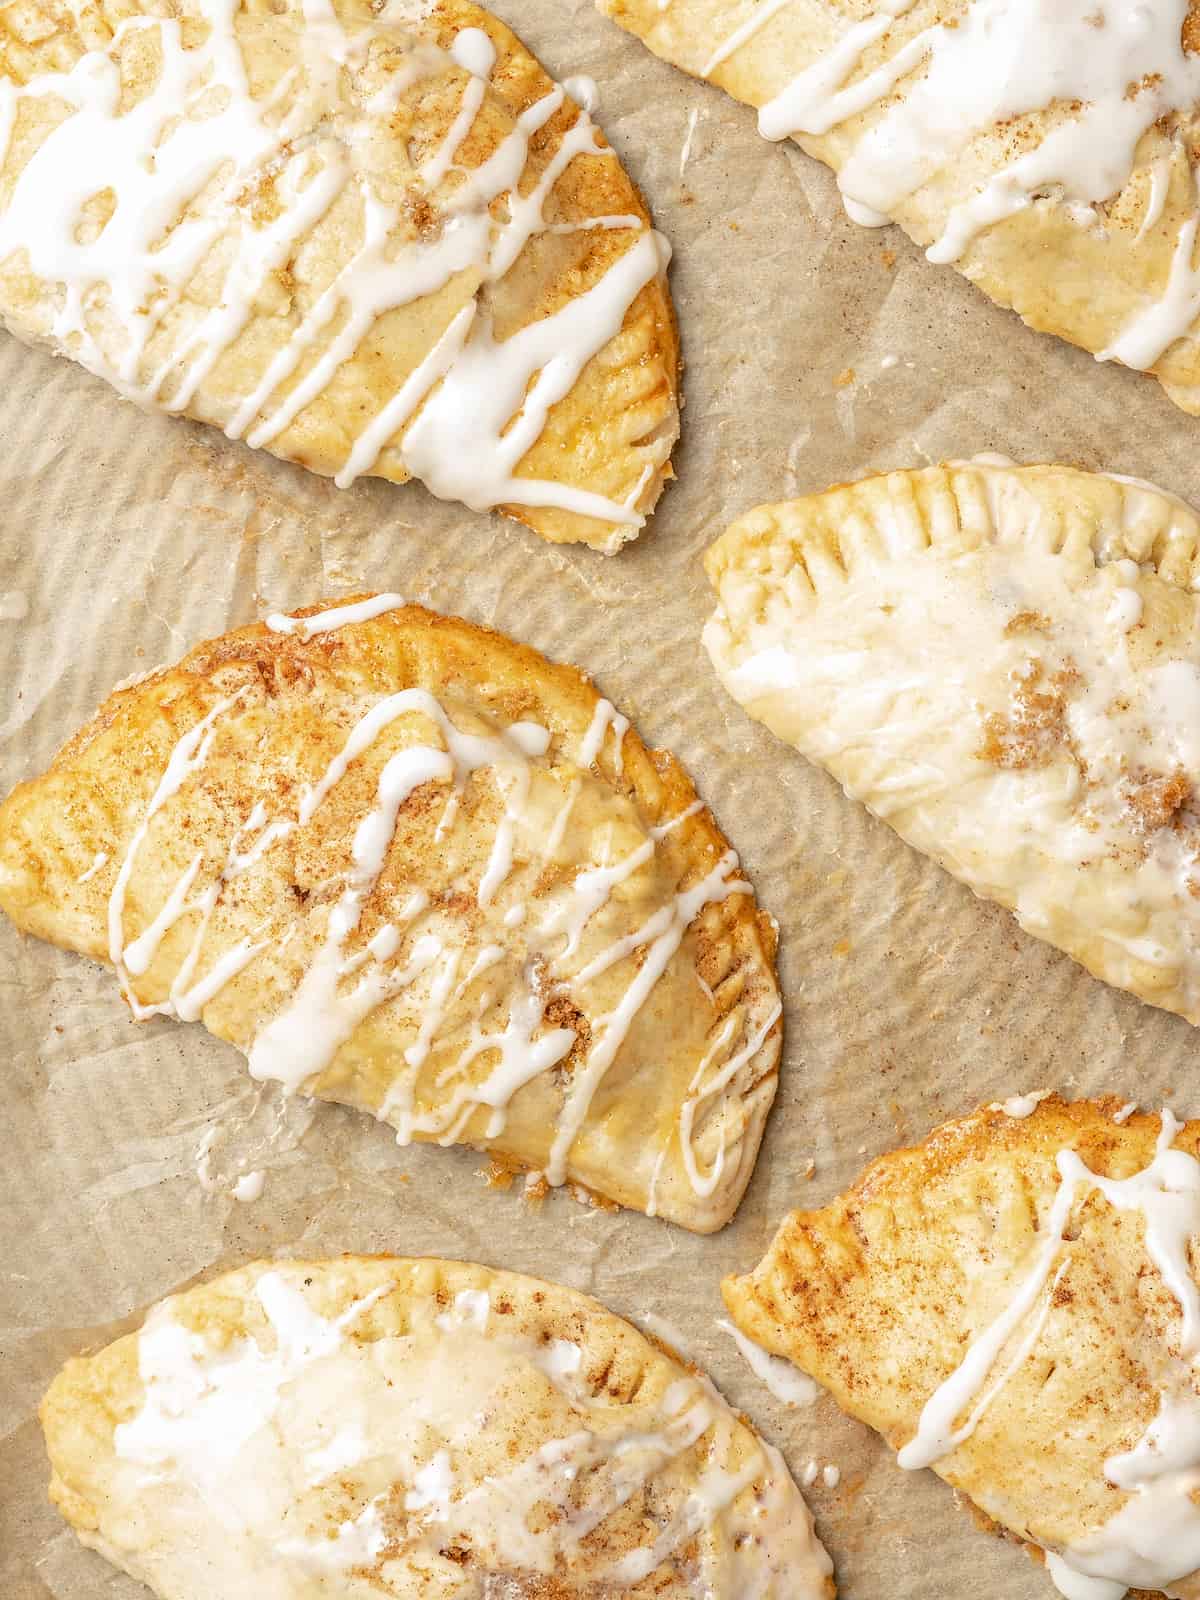 Rows of apple turnovers on parchment paper, drizzled with sweet glaze.